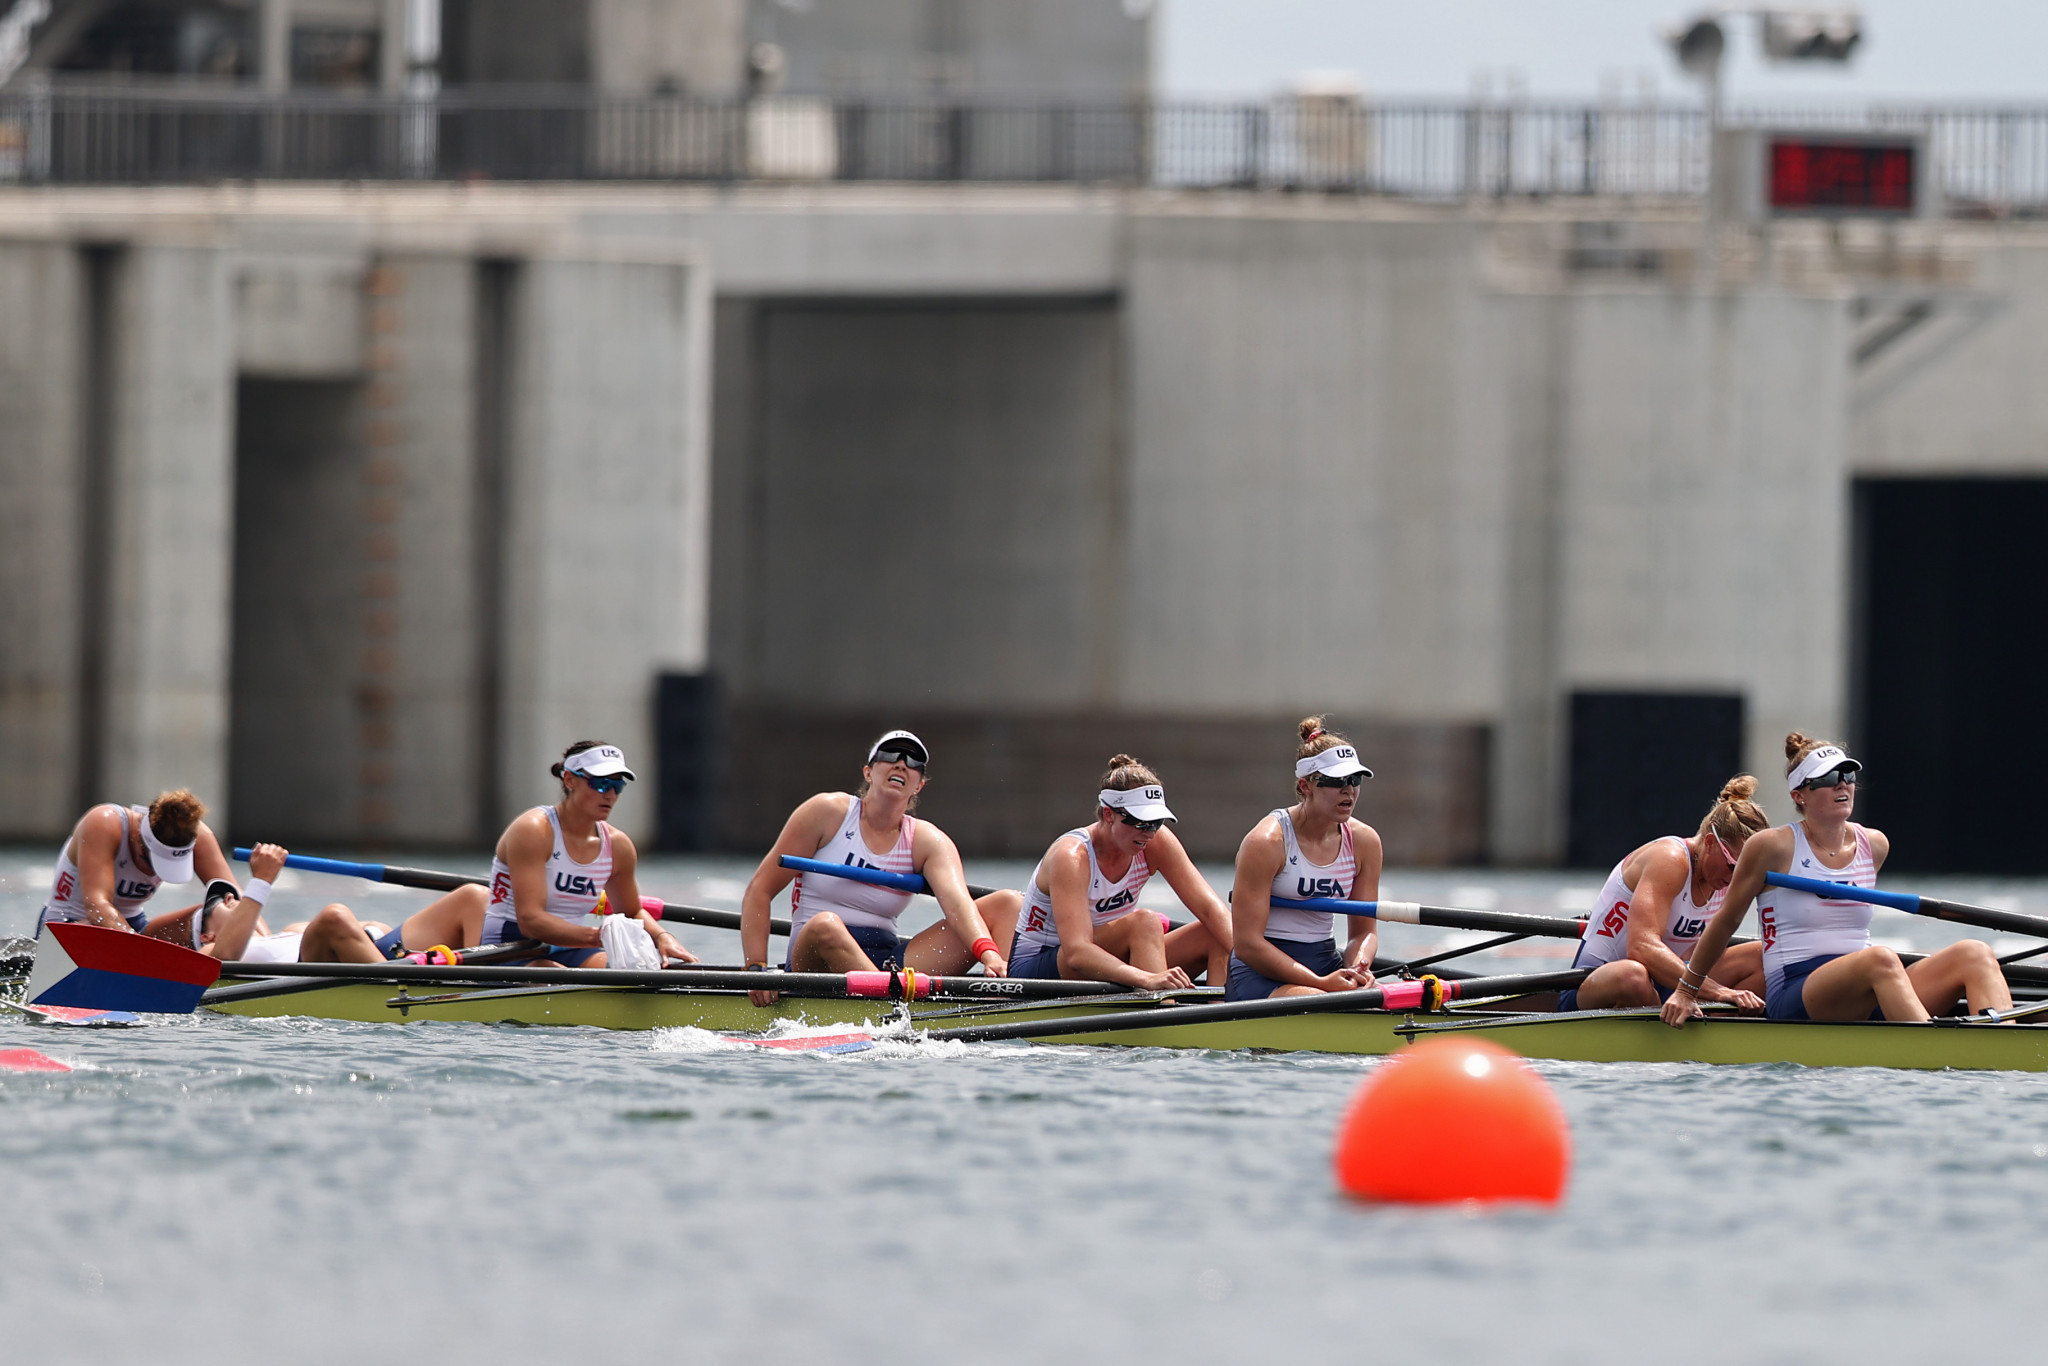 
World Rowing adopted stricter rules for transgender women athletes after a review into the regulations for participation in international competitions ©Getty Images